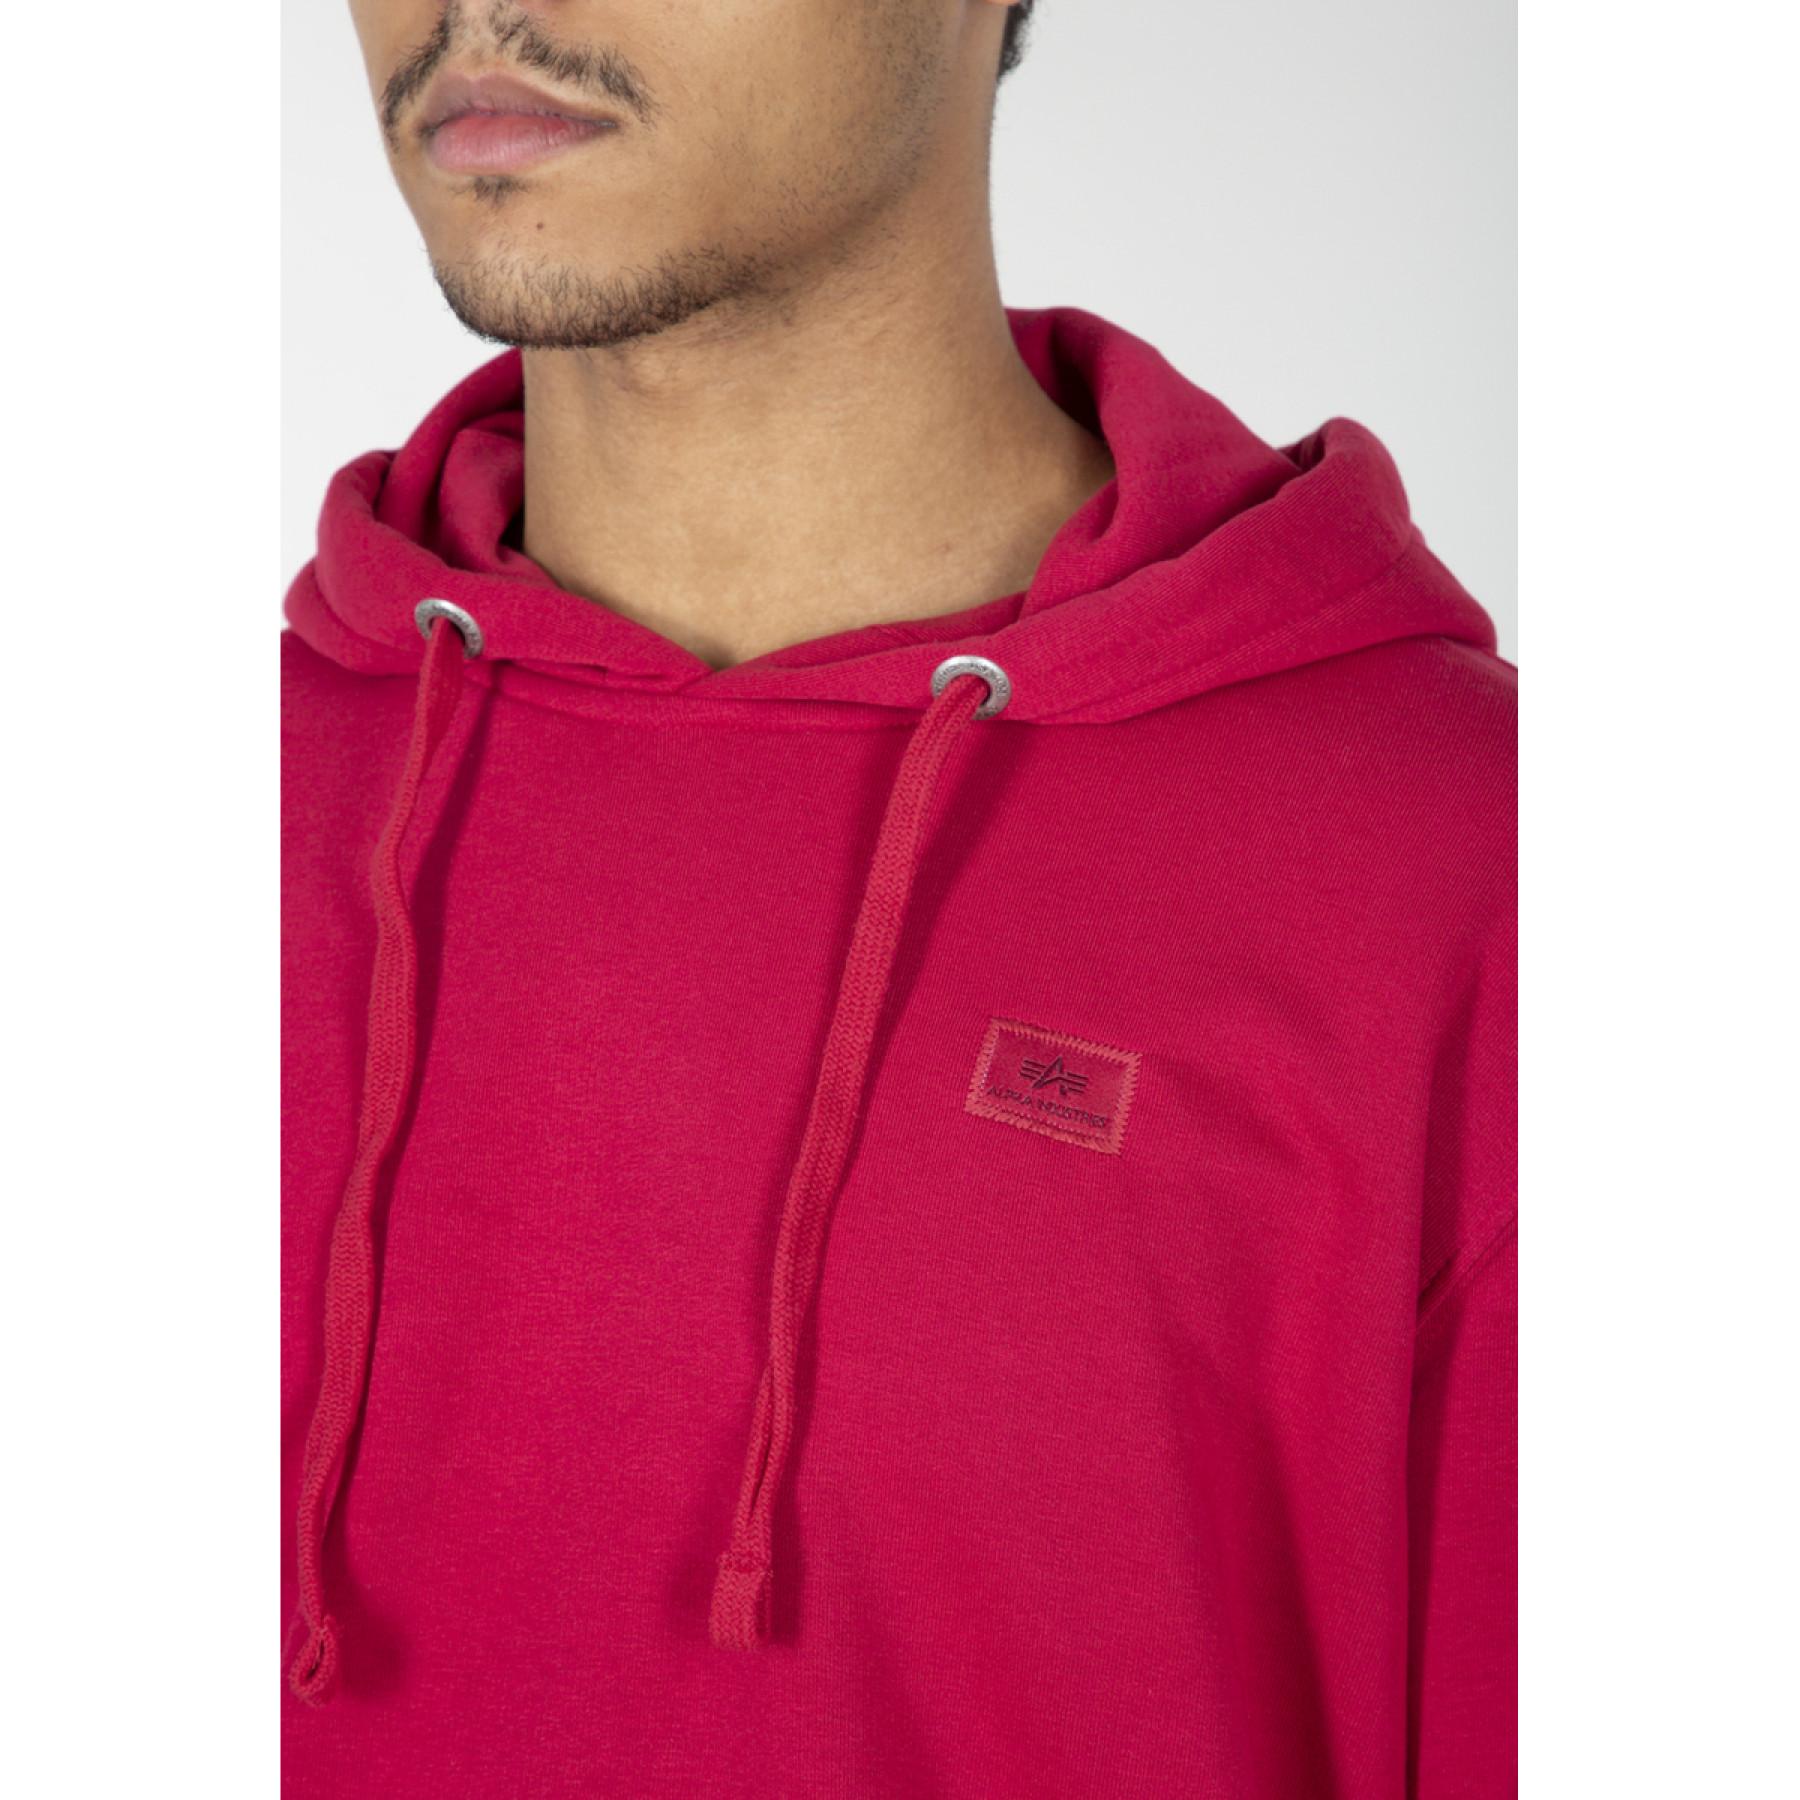 Sweat hooded Alpha Industries X-Fit